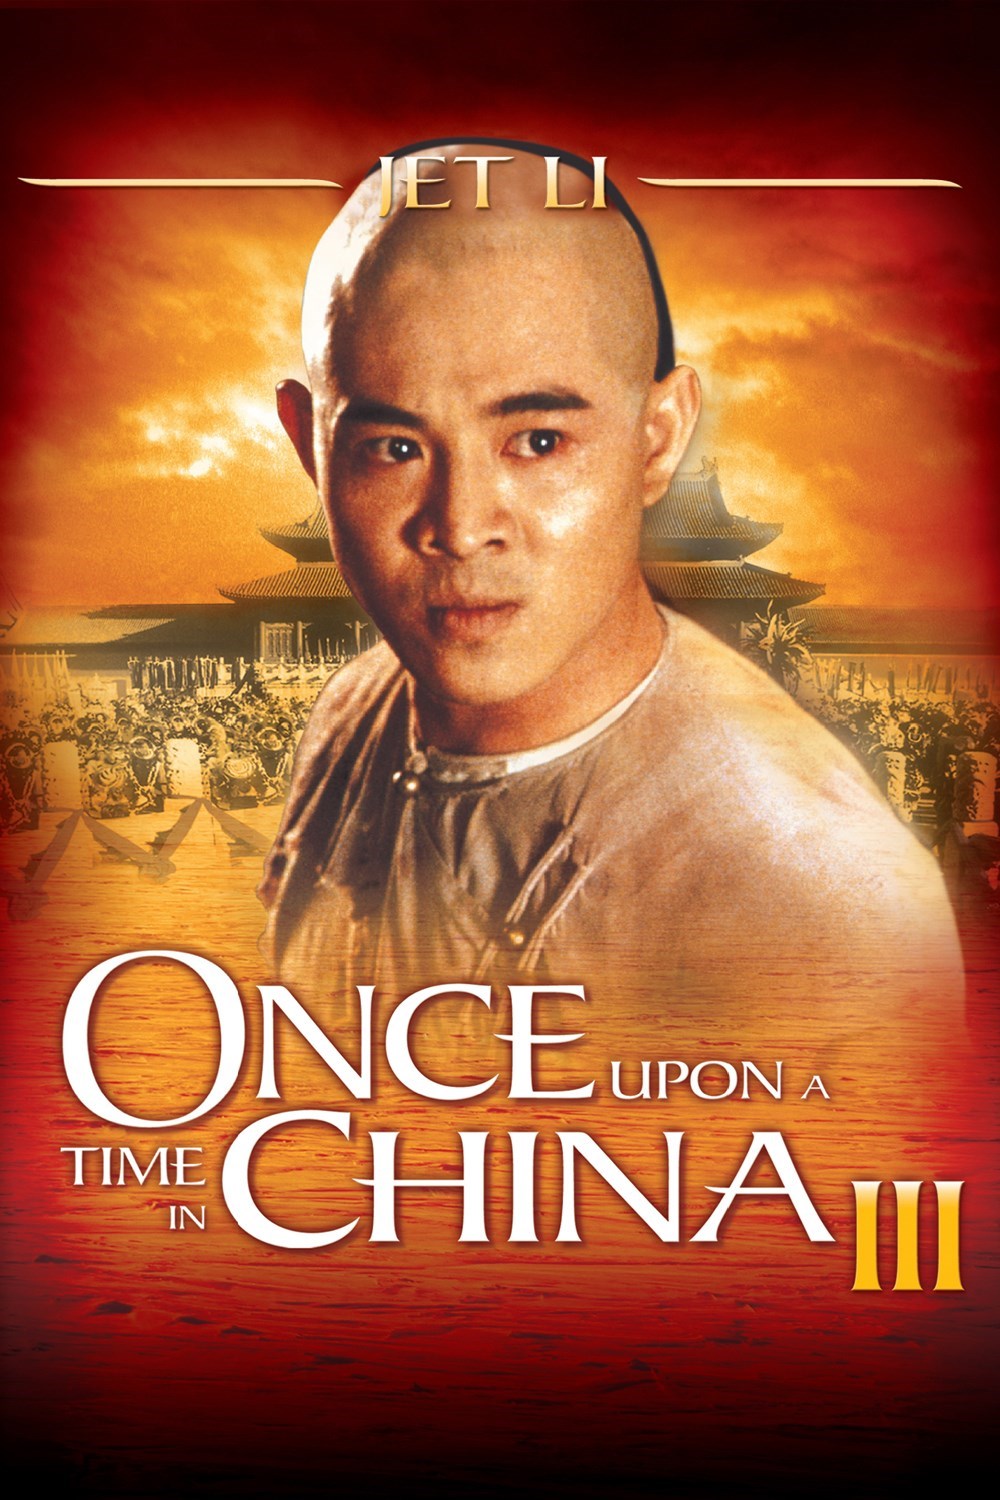 Watch Movies Once Upon a Time in China III (1993) | Jet Li Full Free Online